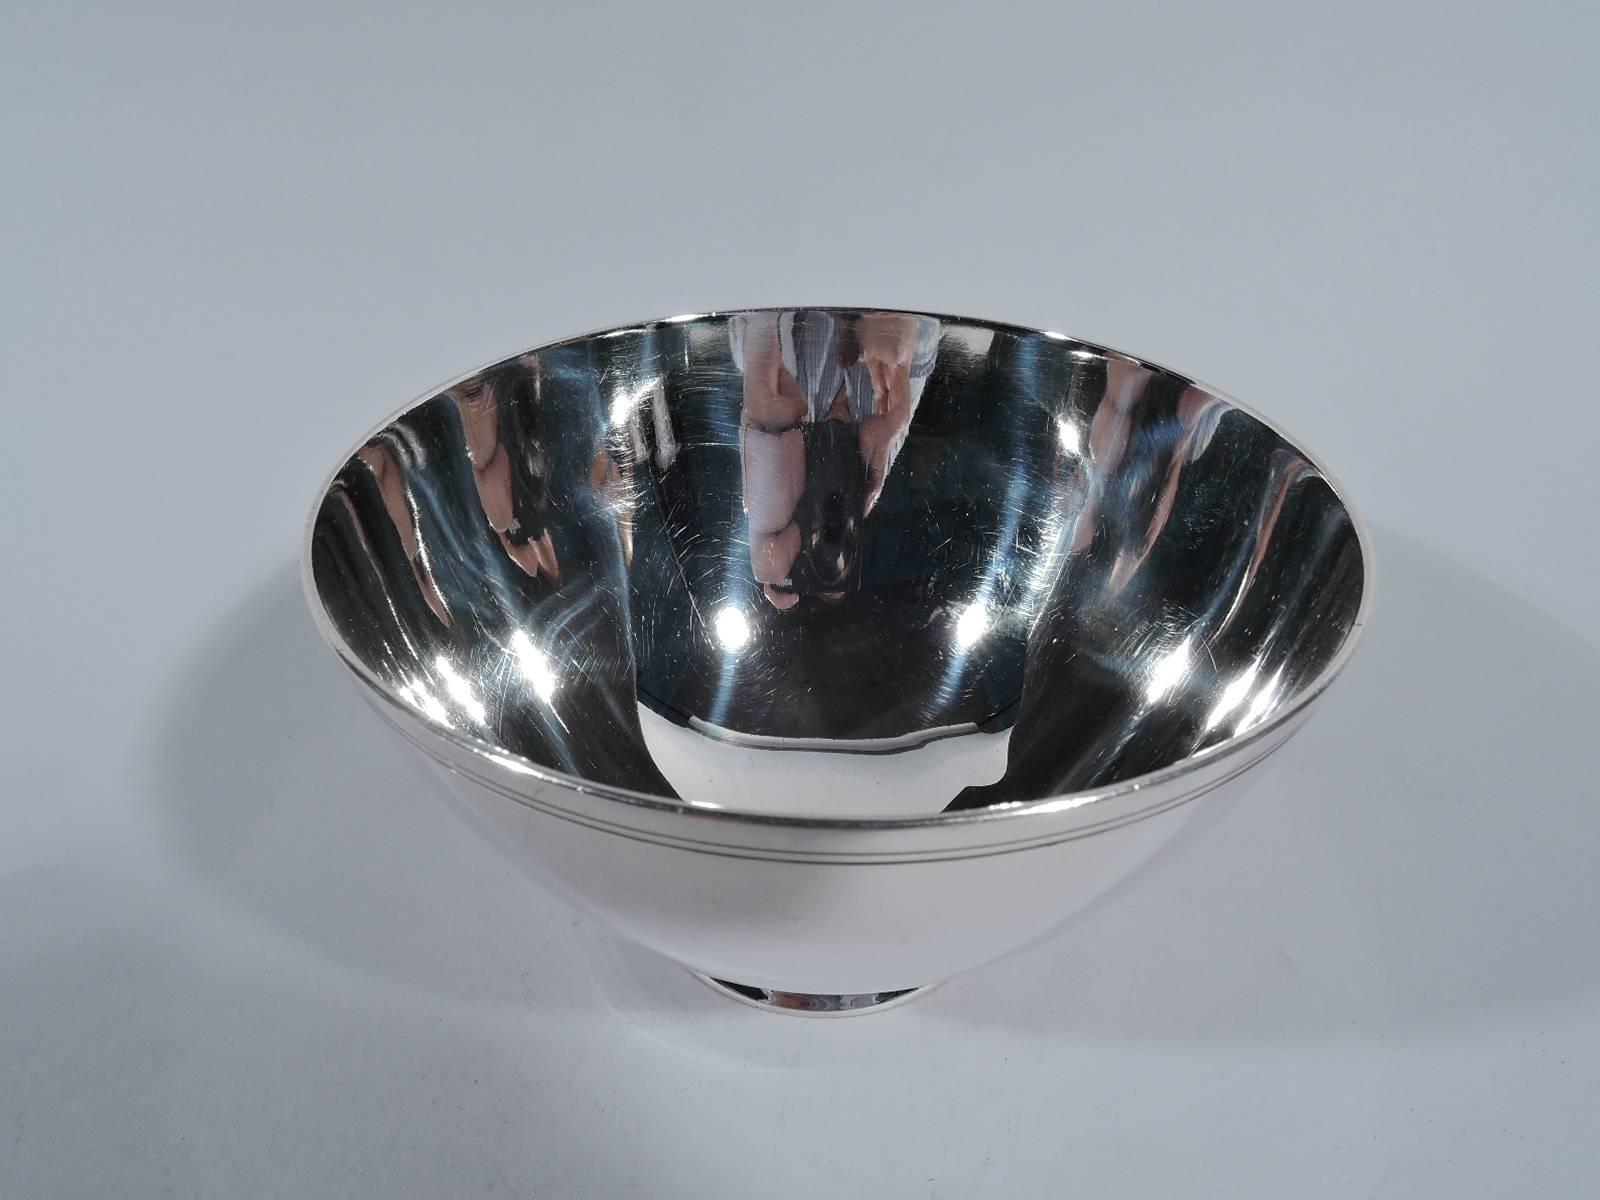 Art Deco sterling silver bowl. Made by Tiffany & Co. in New York, circa 1923. Wide mouth with curved and tapering sides and short spread foot. Two incised bands near rim. Hallmark includes pattern no. 20226 (first produced in 1923) and director’s